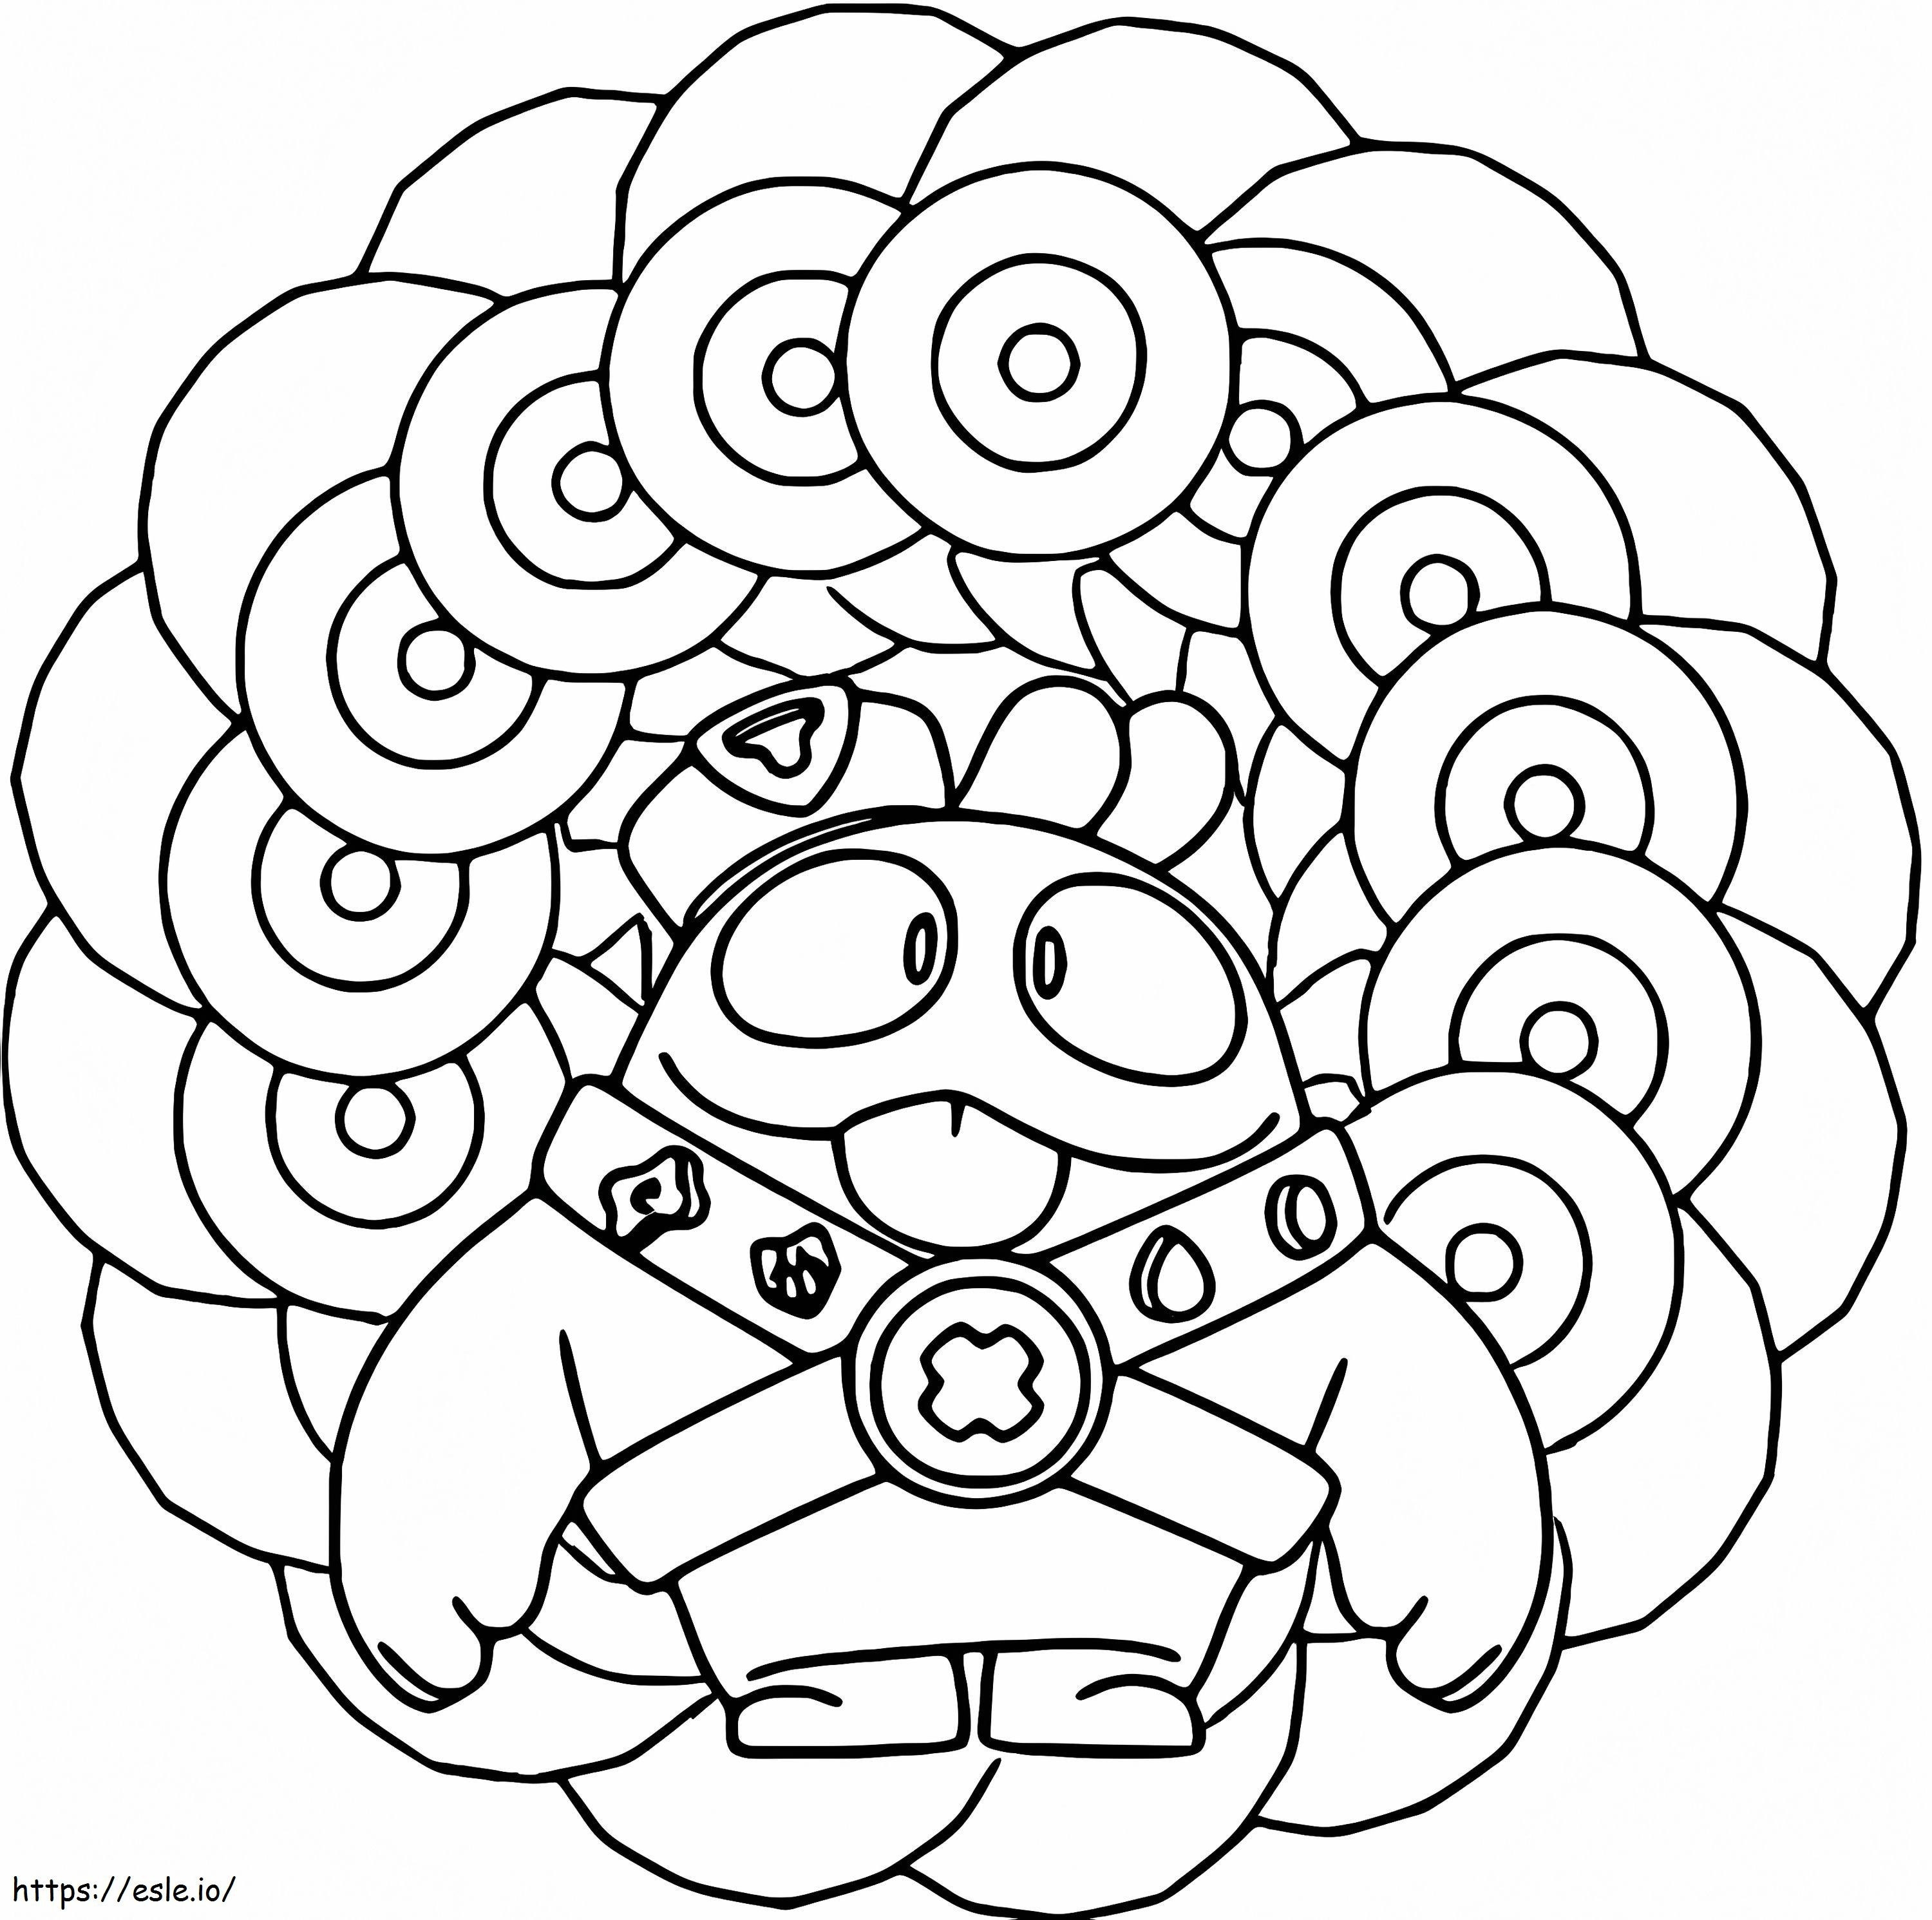 Squeak Brawl Stars To Print Coloring Page coloring page